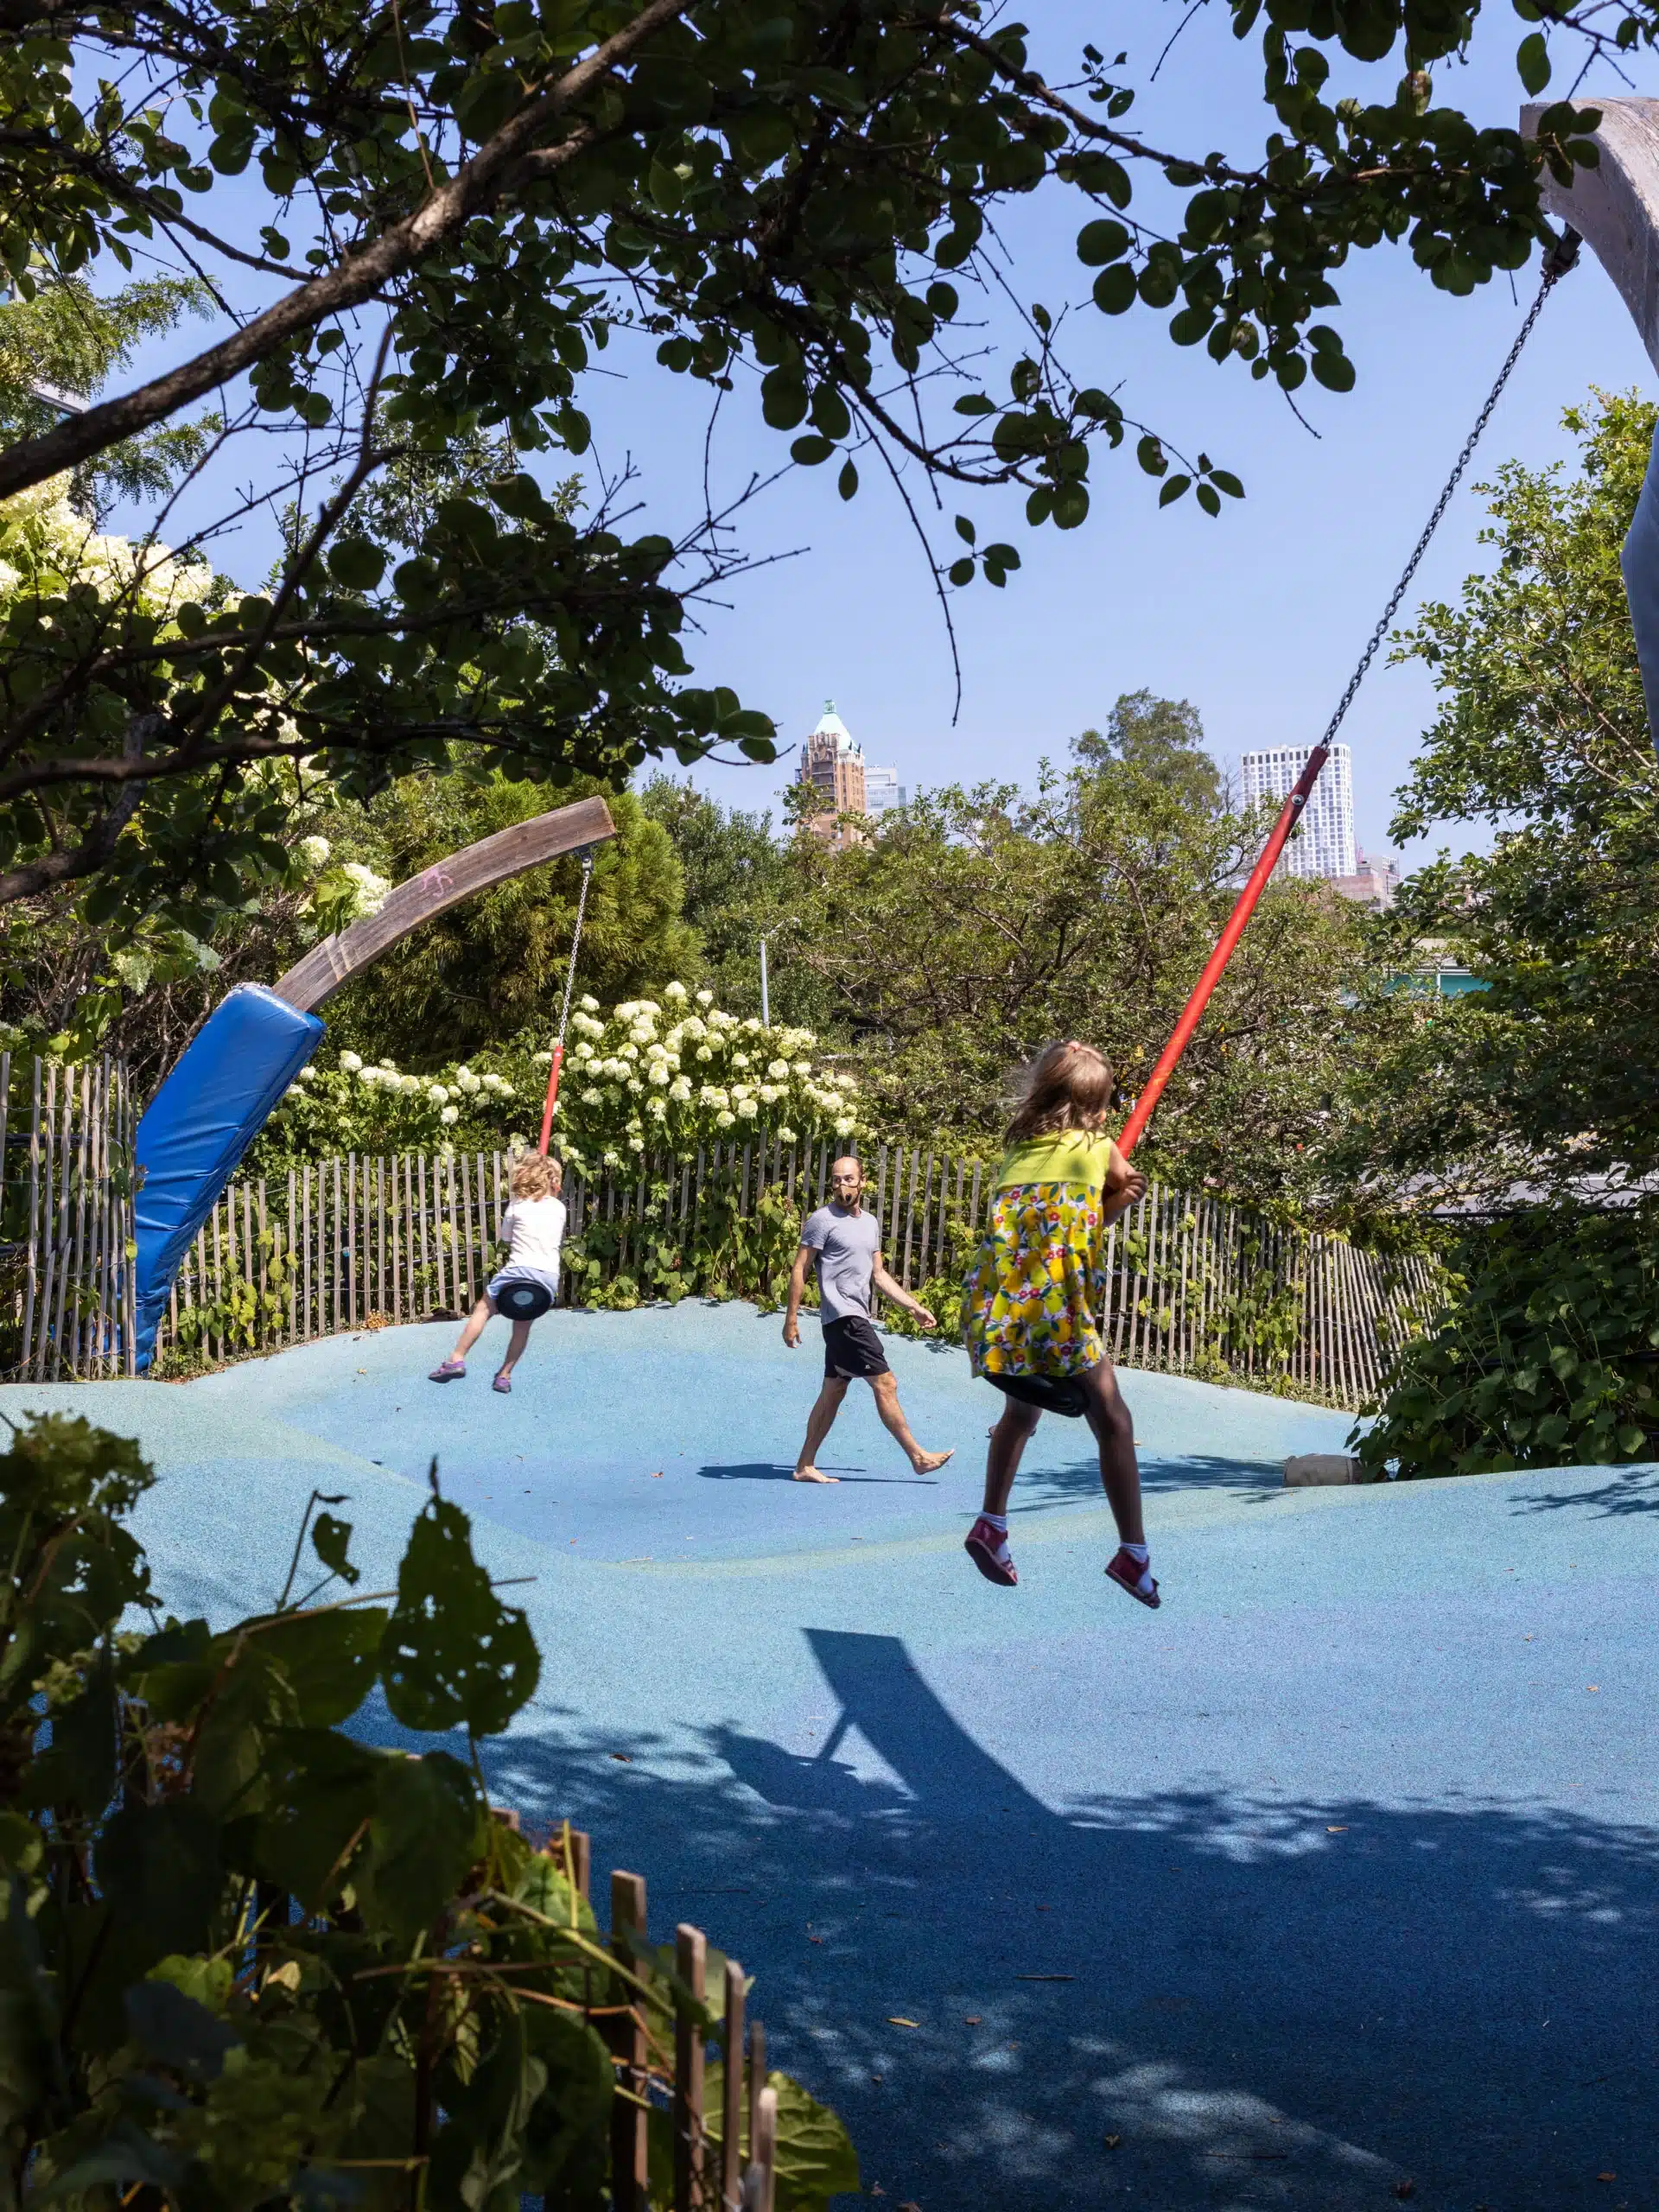 Children swinging on rope swings at Swing Valley at Pier 6 on a sunny day.